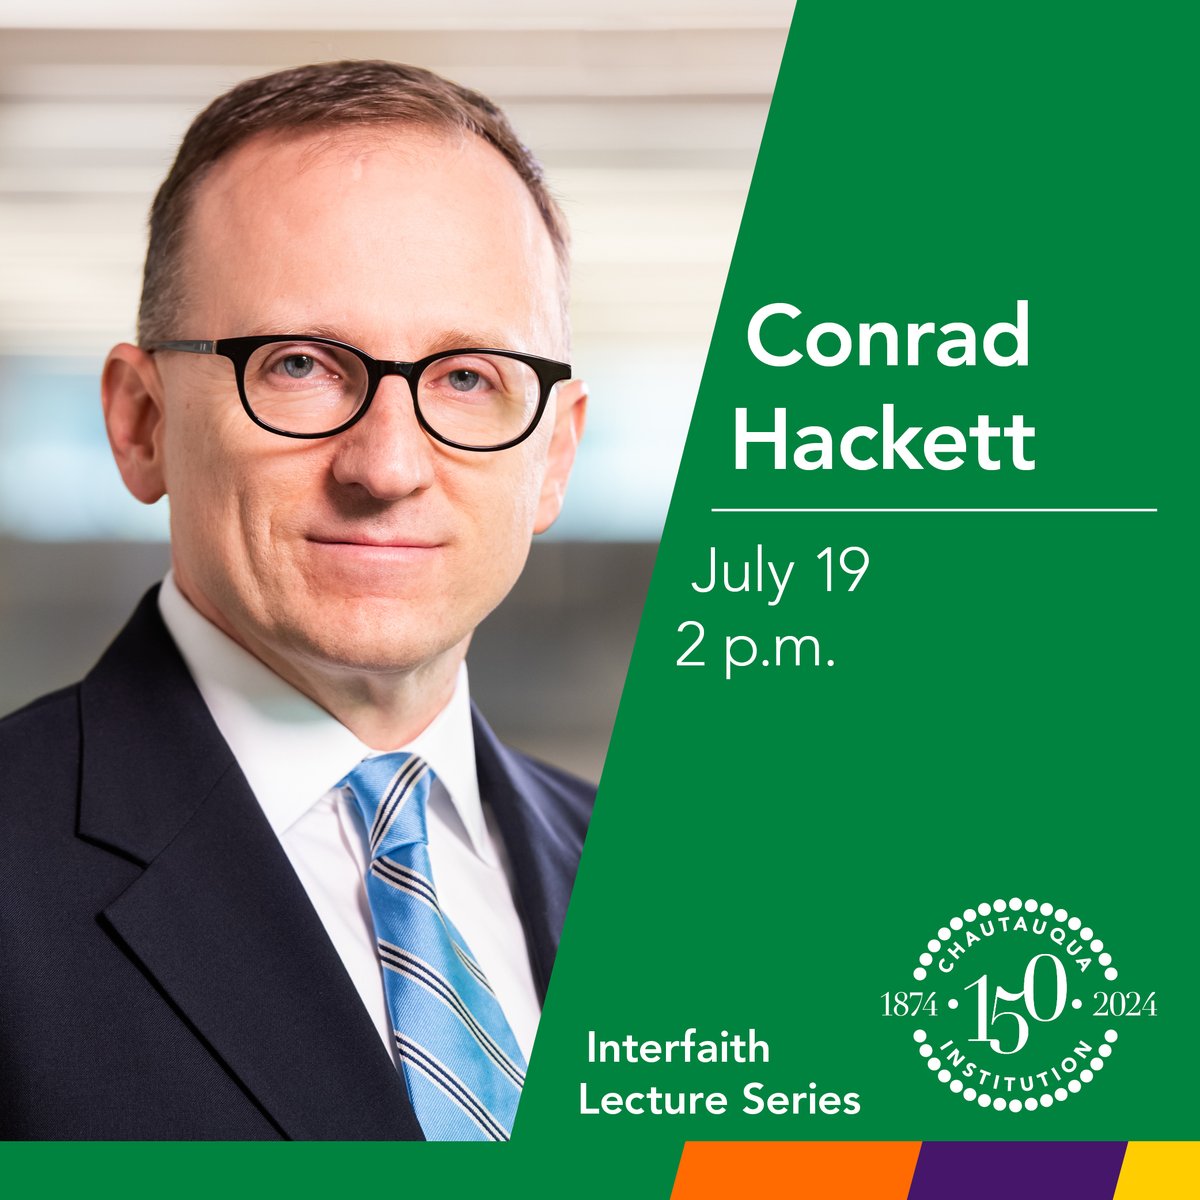 🚨#CHQ2024 ANNOUNCEMENT🚨 Associate director of research and senior demographer at Pew Research Center, Conrad Hackett joins our 2024 Interfaith Lecture Series for a 150th anniversary of unforgettable events and experiences! #CHQ2024 #chq150 #INFWeekFour